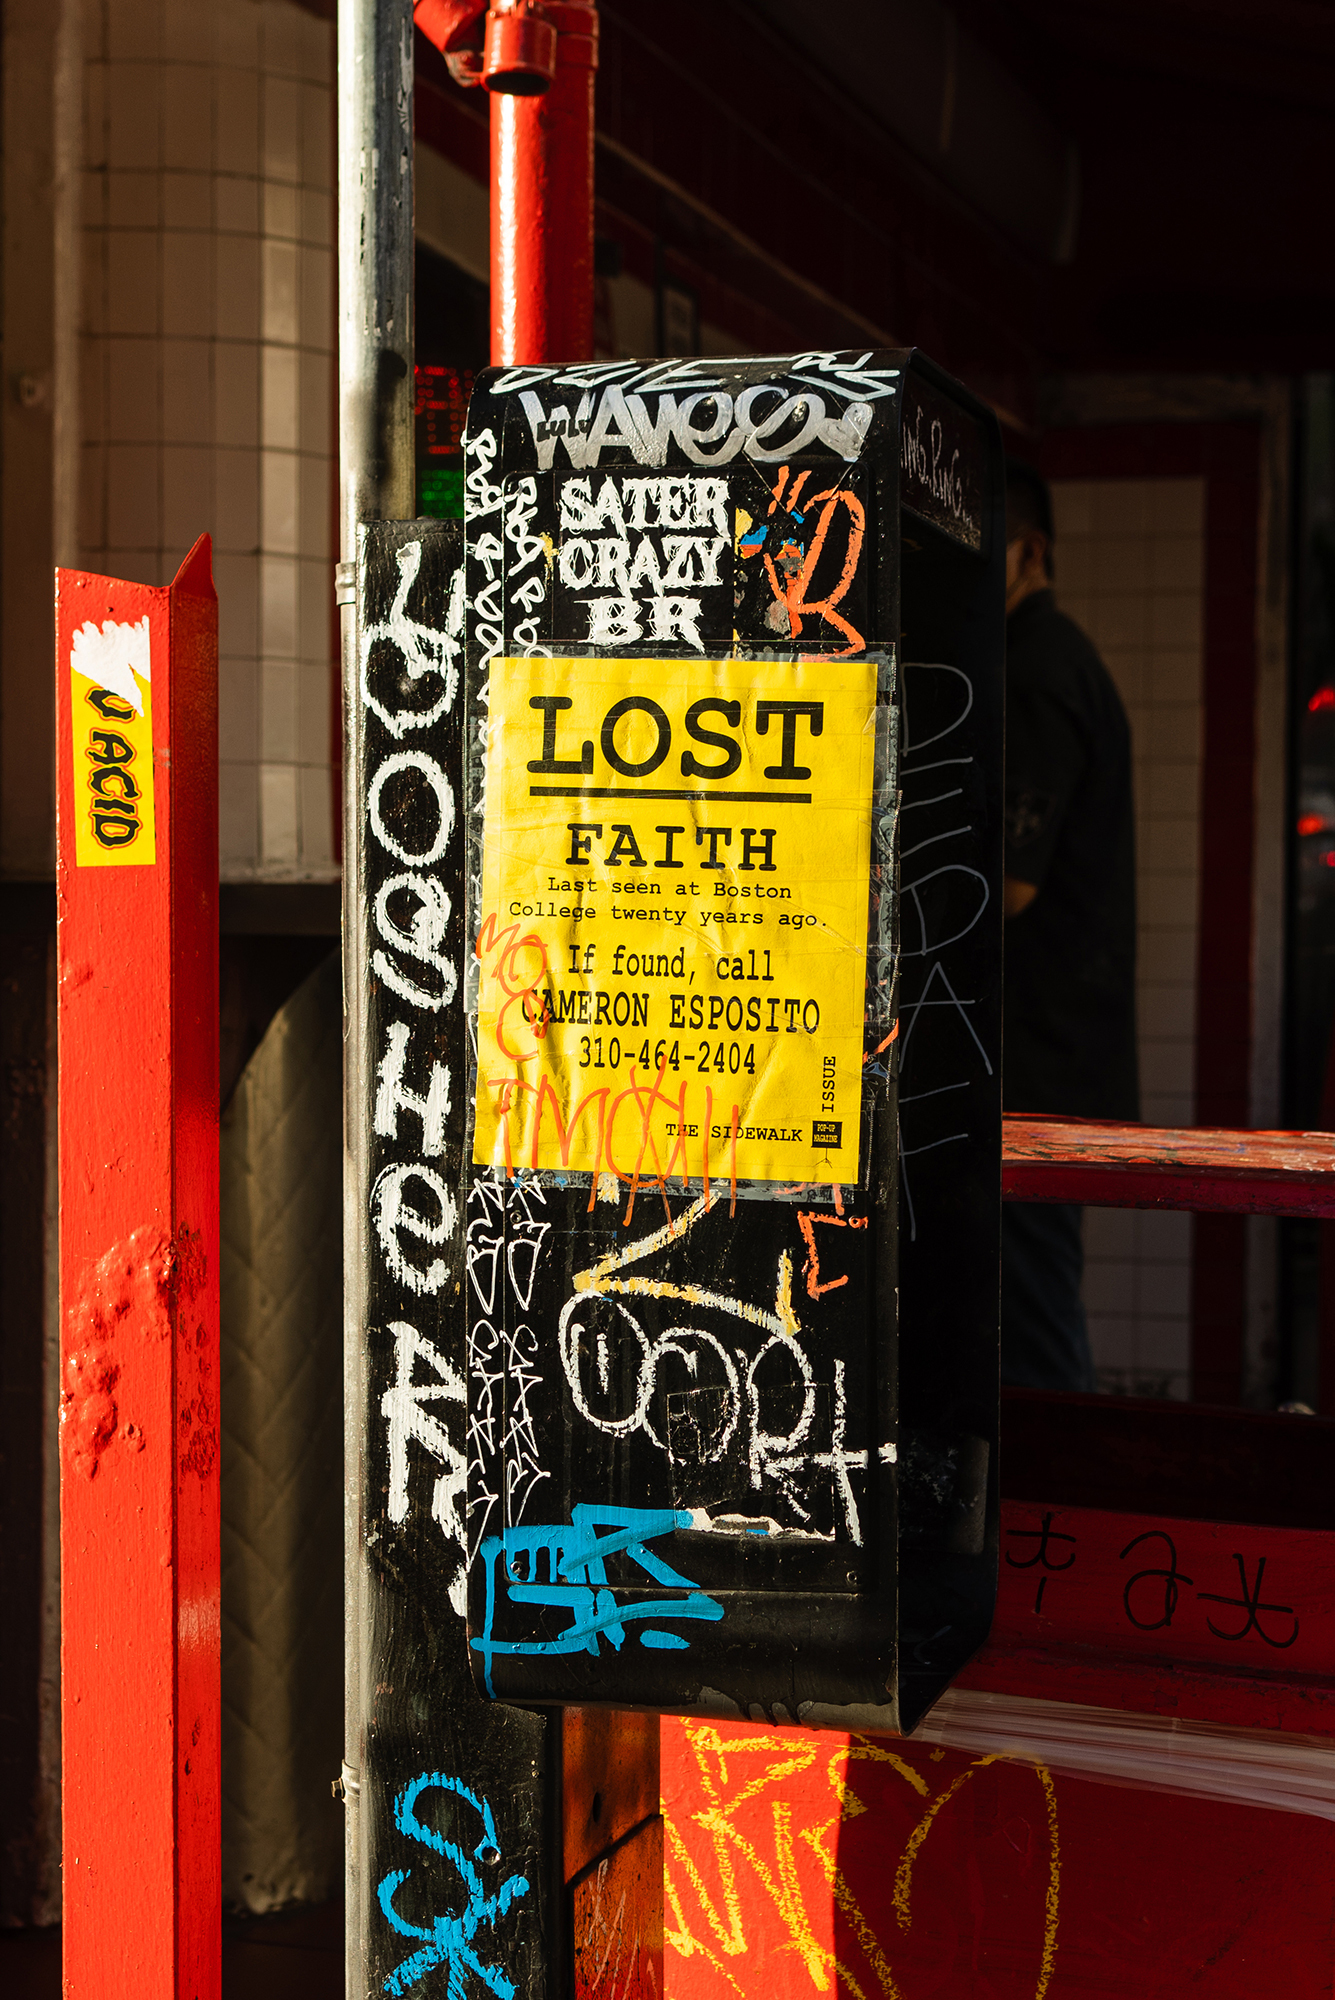 Image of a lost item flyer